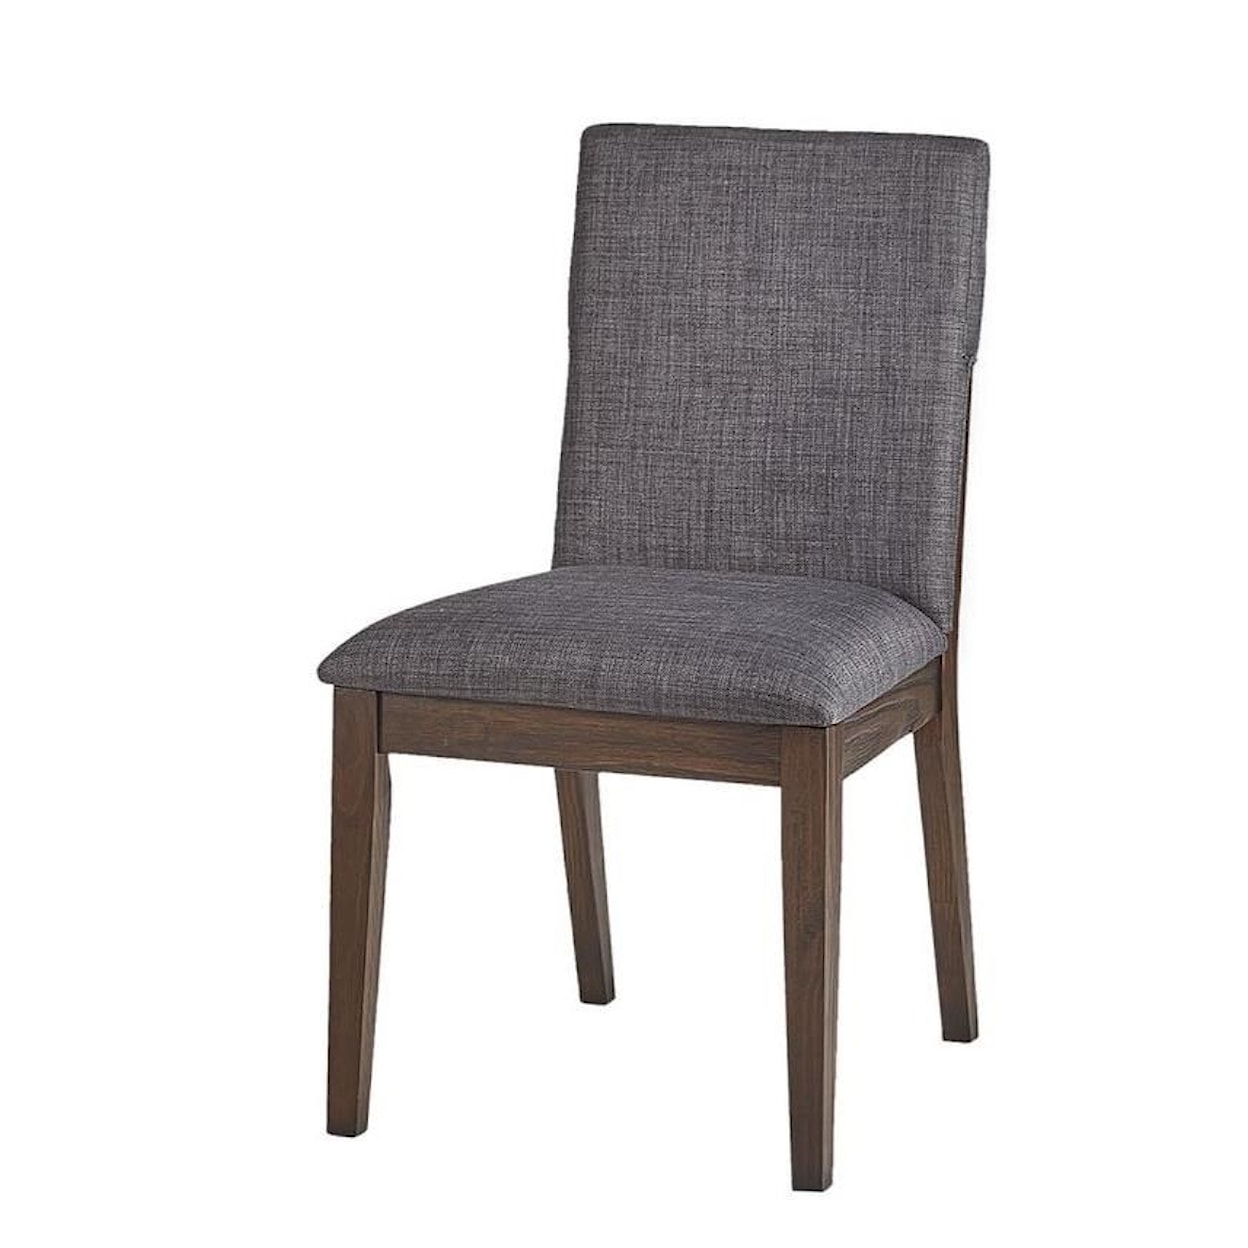 AAmerica Palm Canyon Upholstered Chair